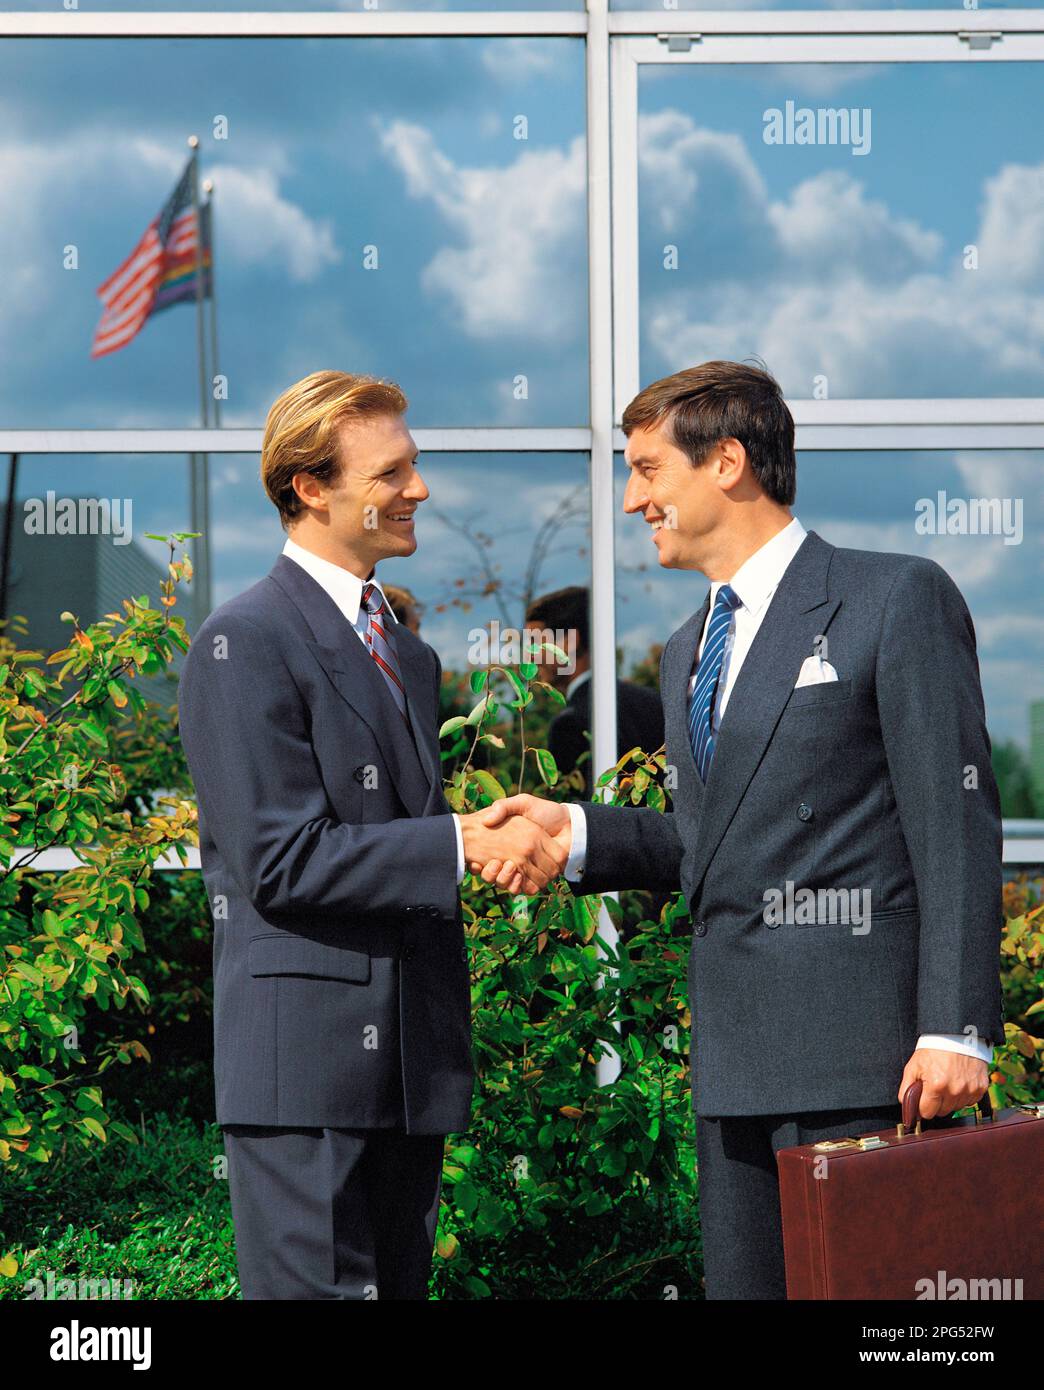 Two businessmen shaking hands, standing outside a commercial building. Stock Photo